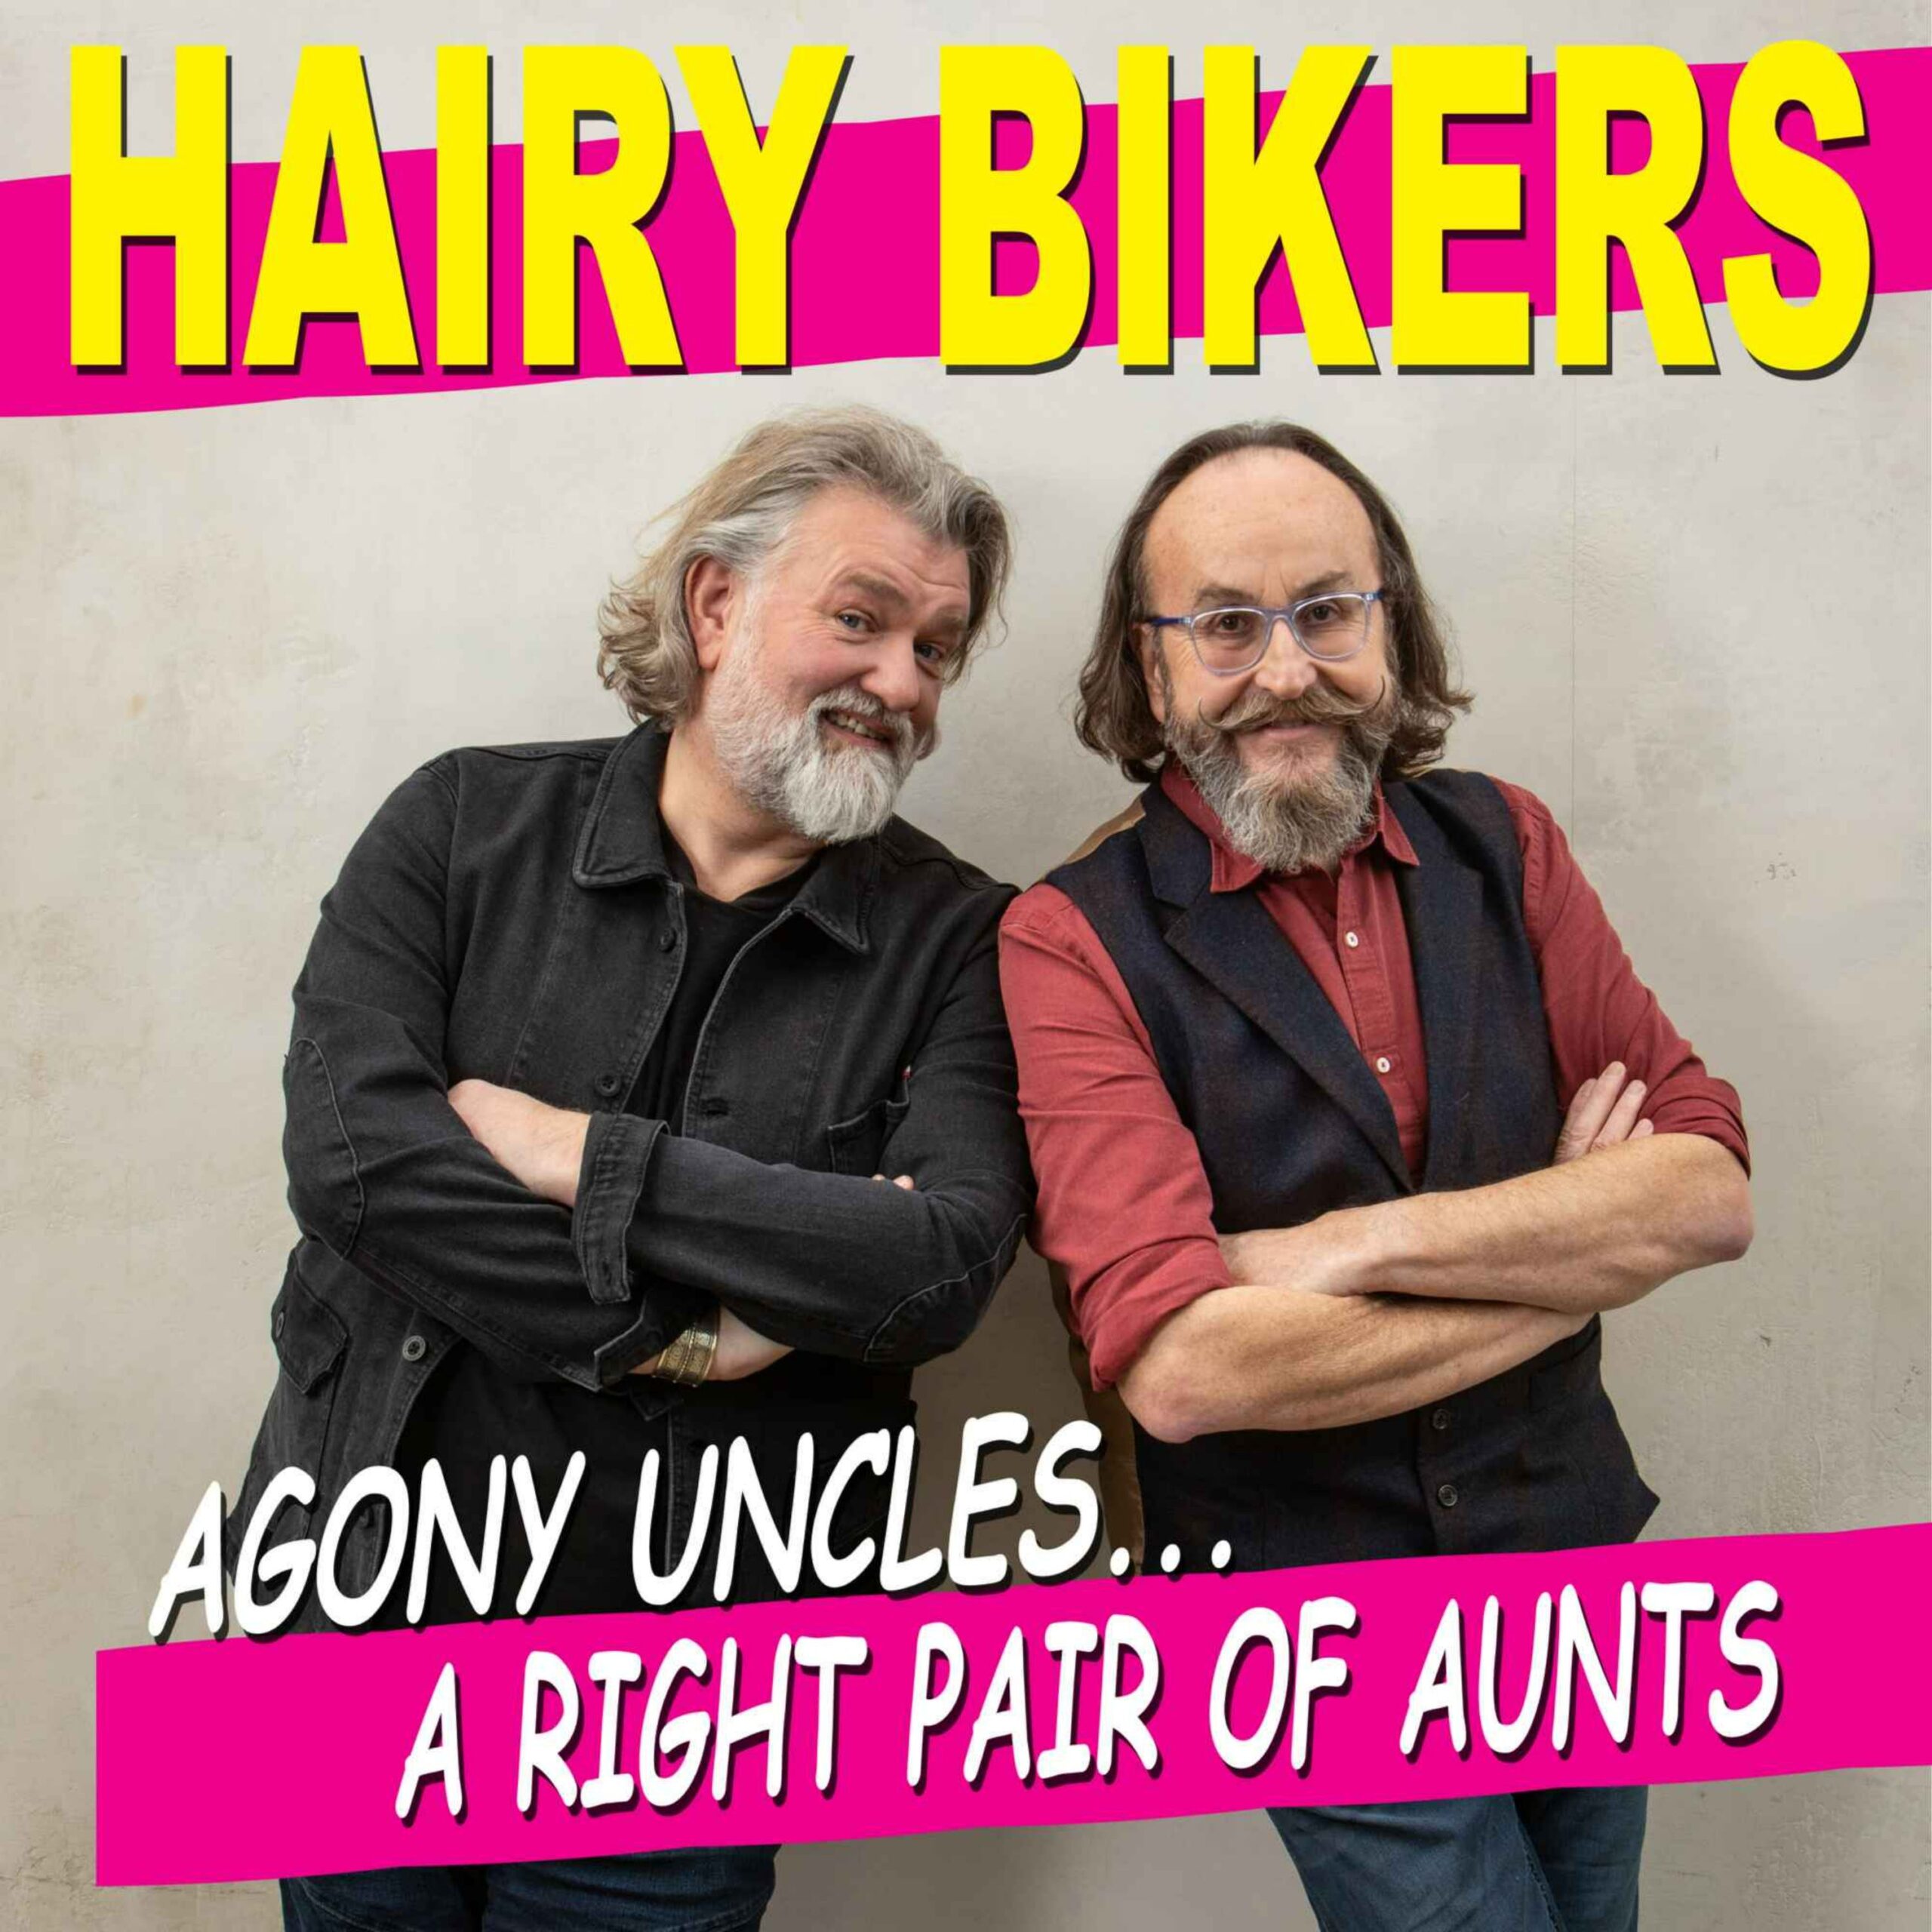 The Hairy Bikers – Agony Uncles